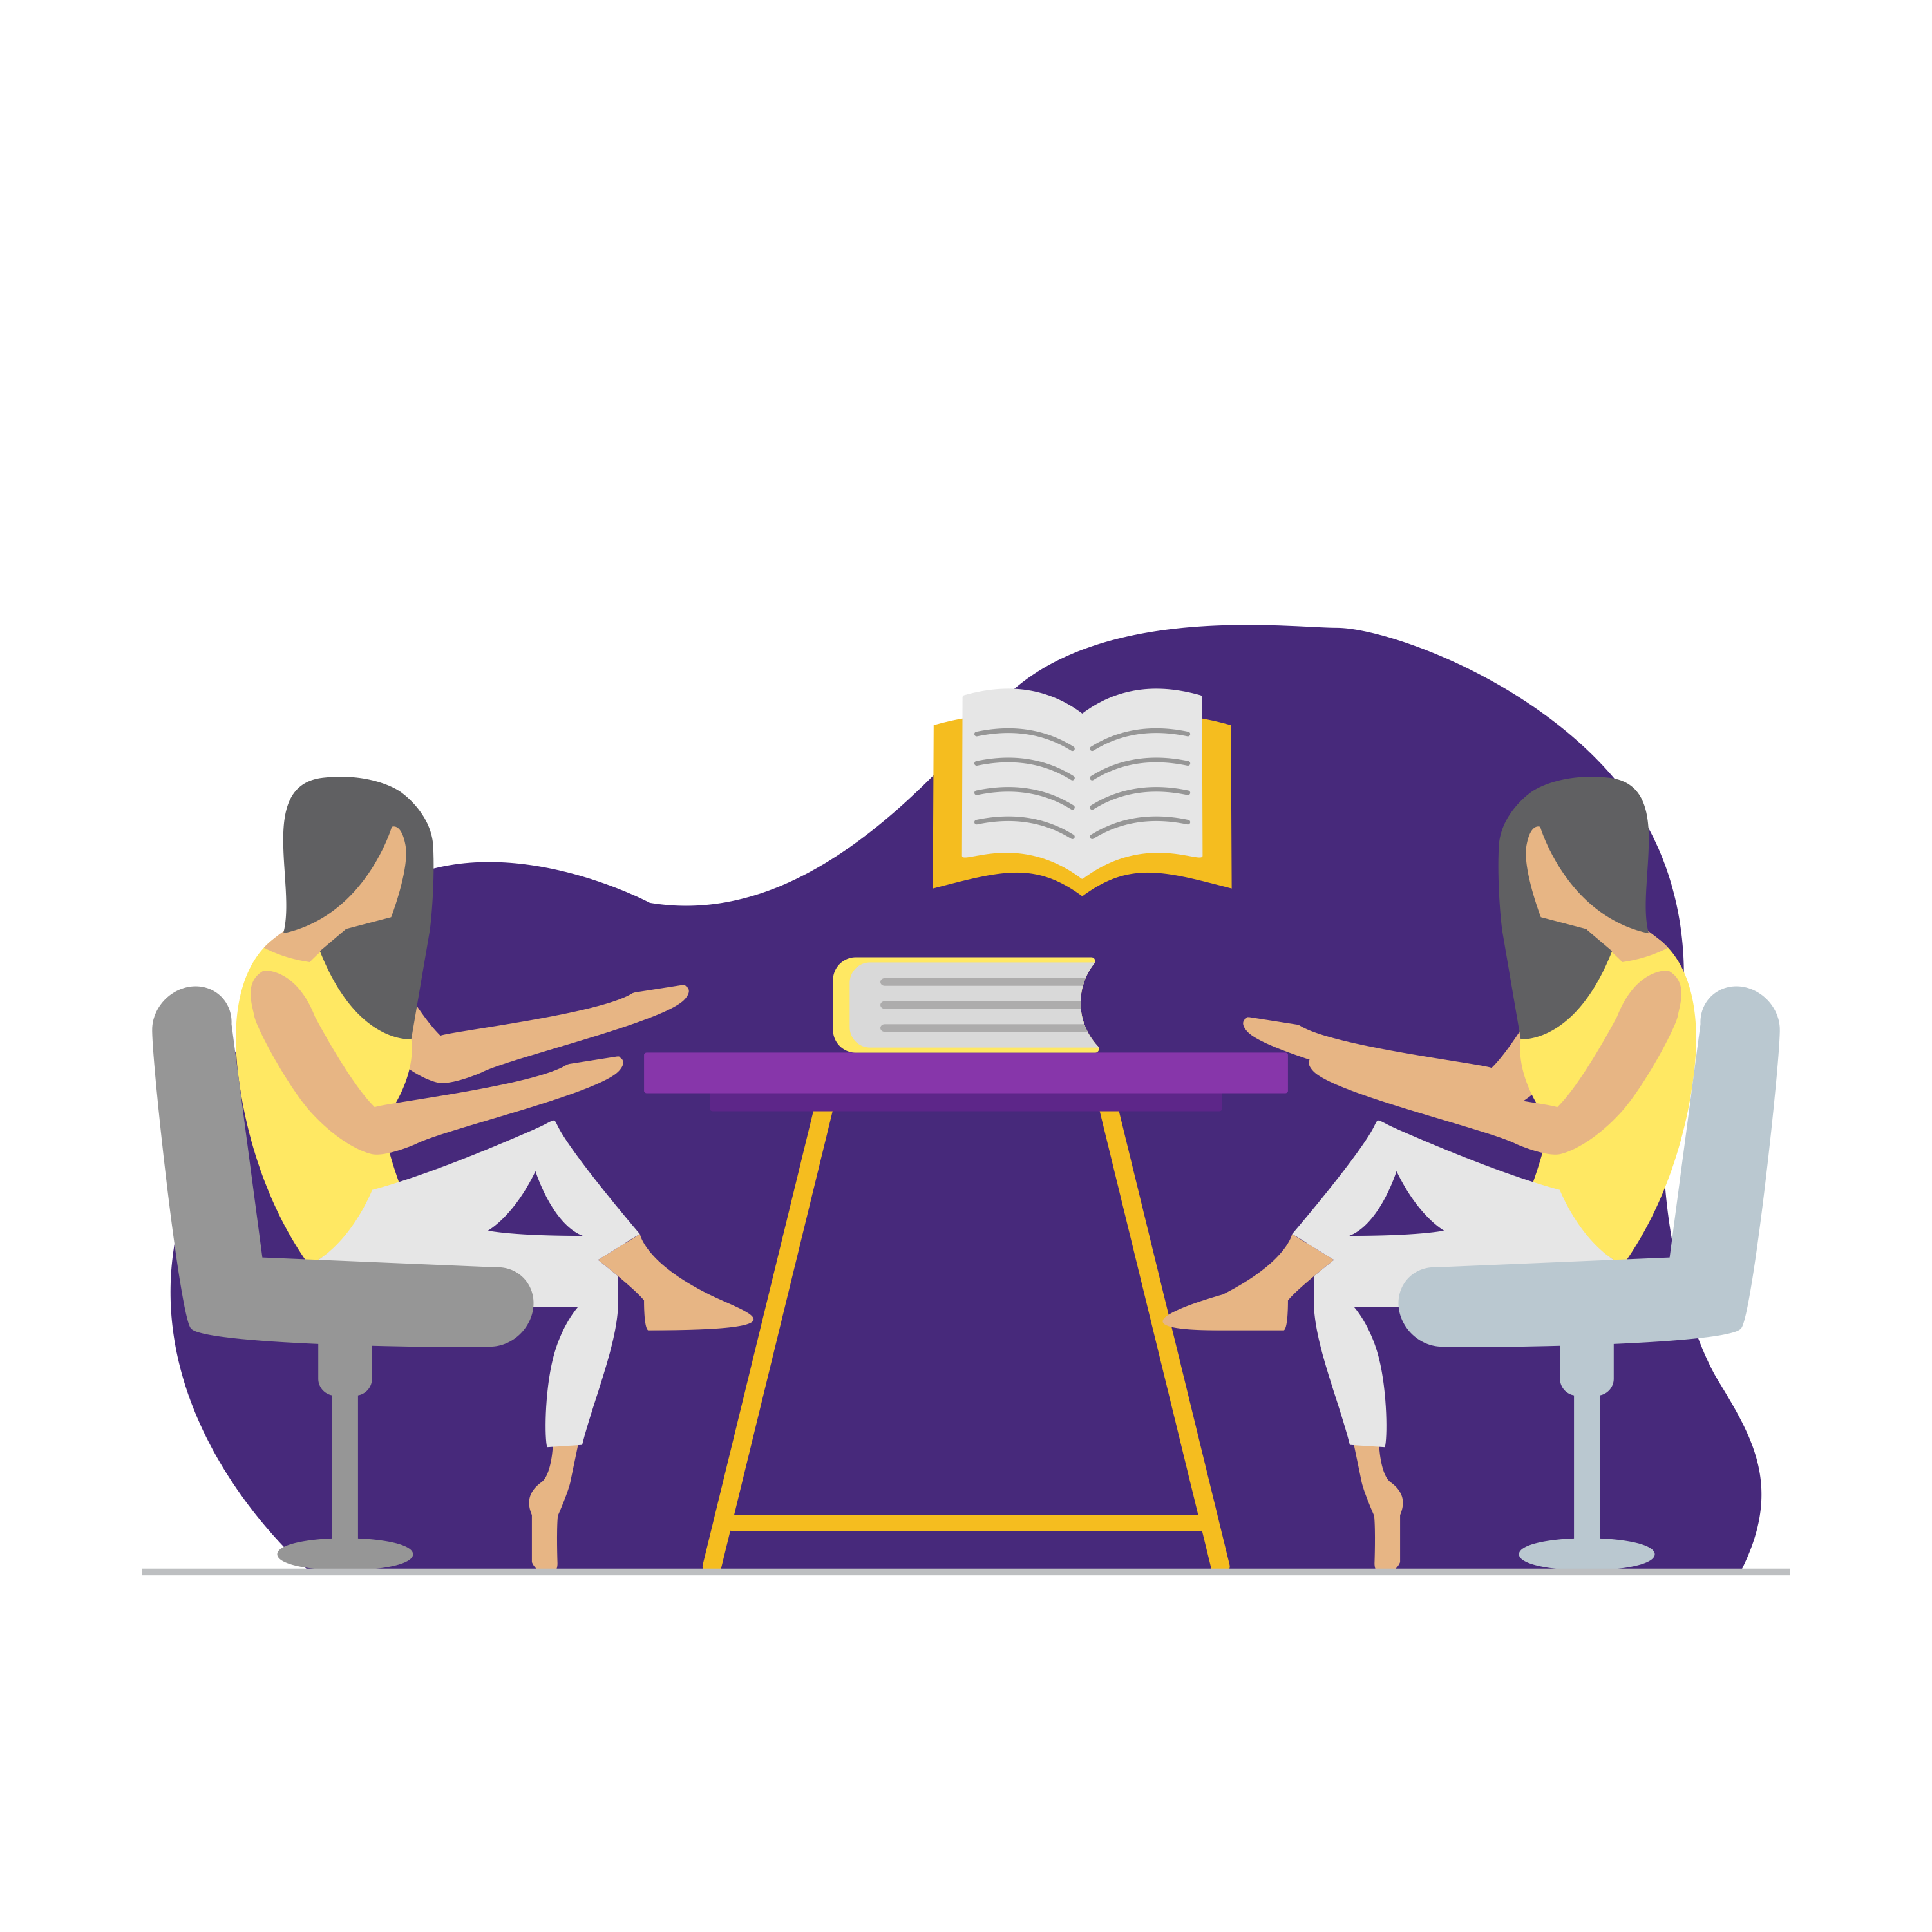 meeting-books-reading-girls-illustration-chairs-table-illustration